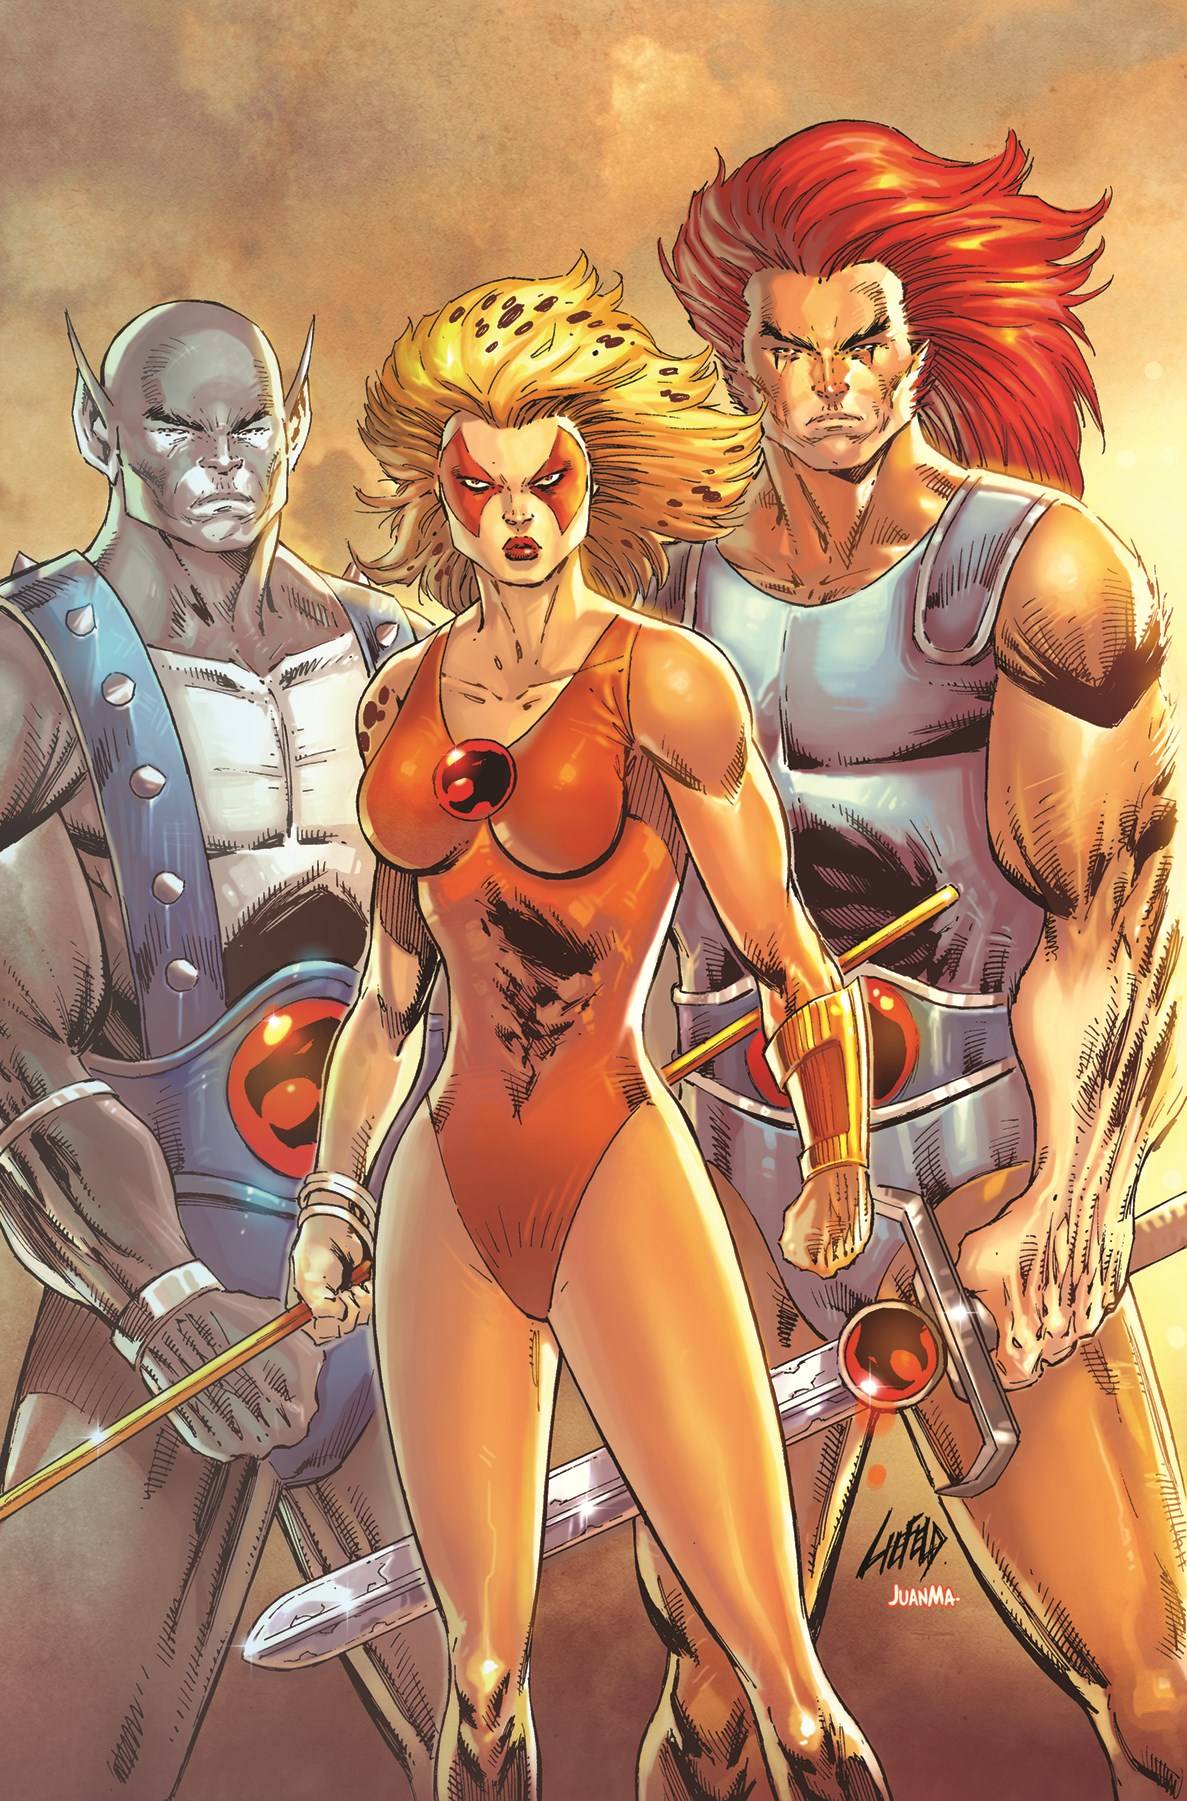 Thundercats #3 Cover Zc 15 Copy Incentive Liefeld Virgin